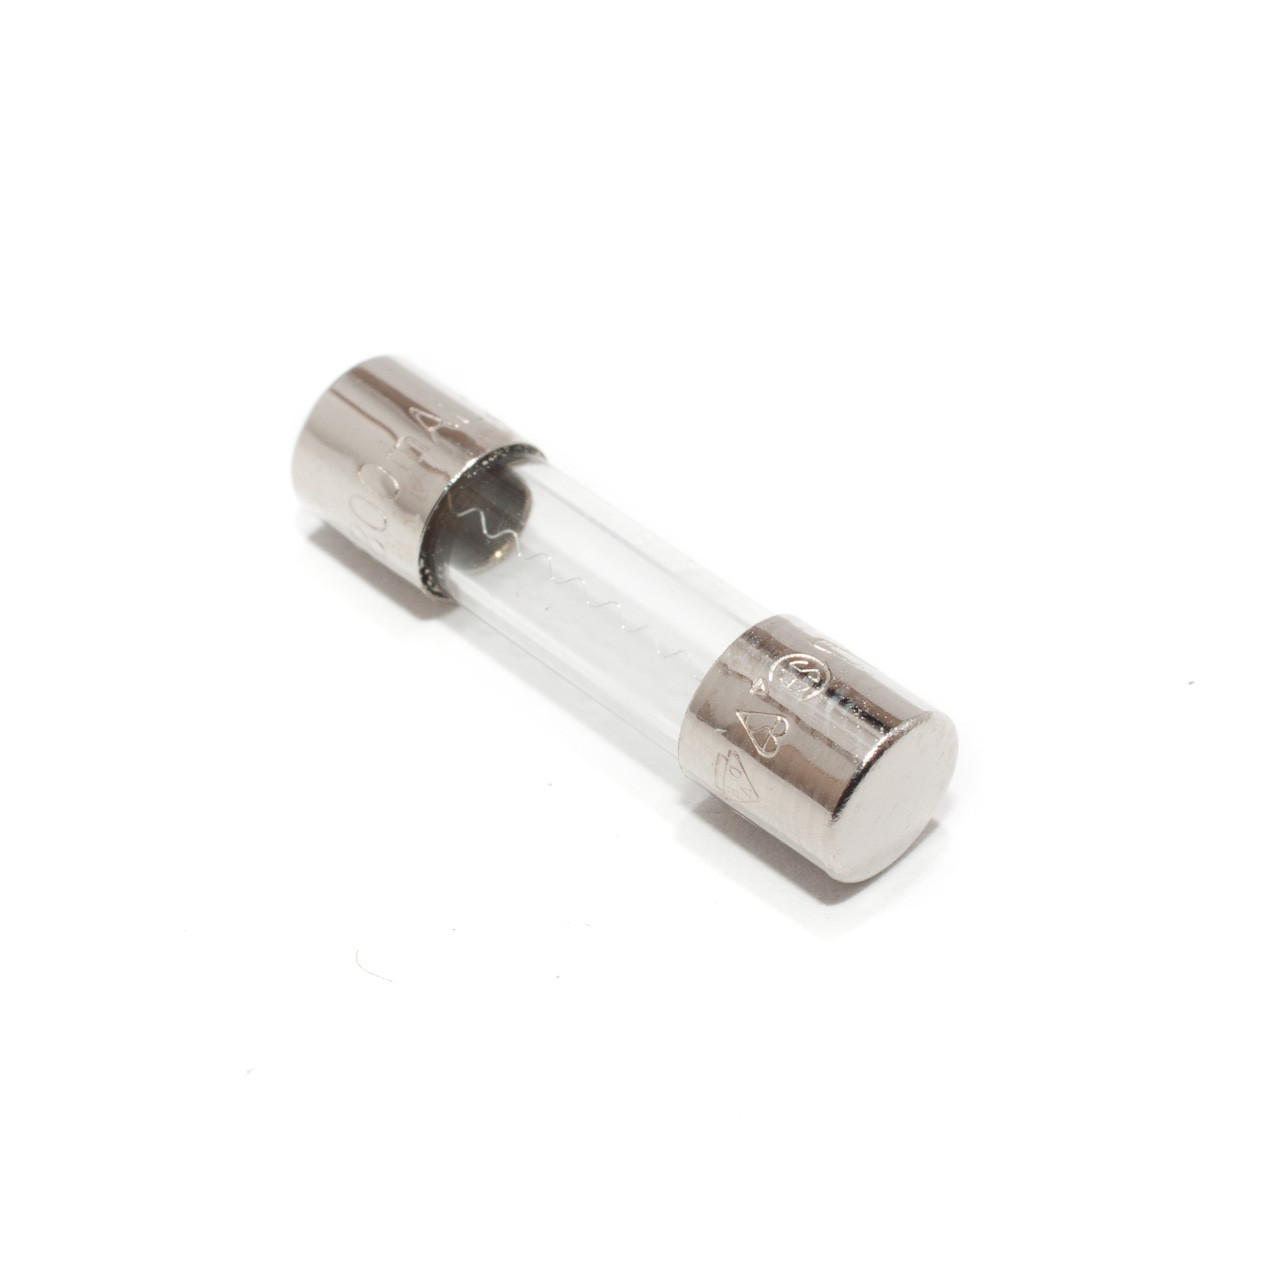 0.8A 250VAC (5 x 20mm) Fast Acting Fuse - TremTech Electrical Systems